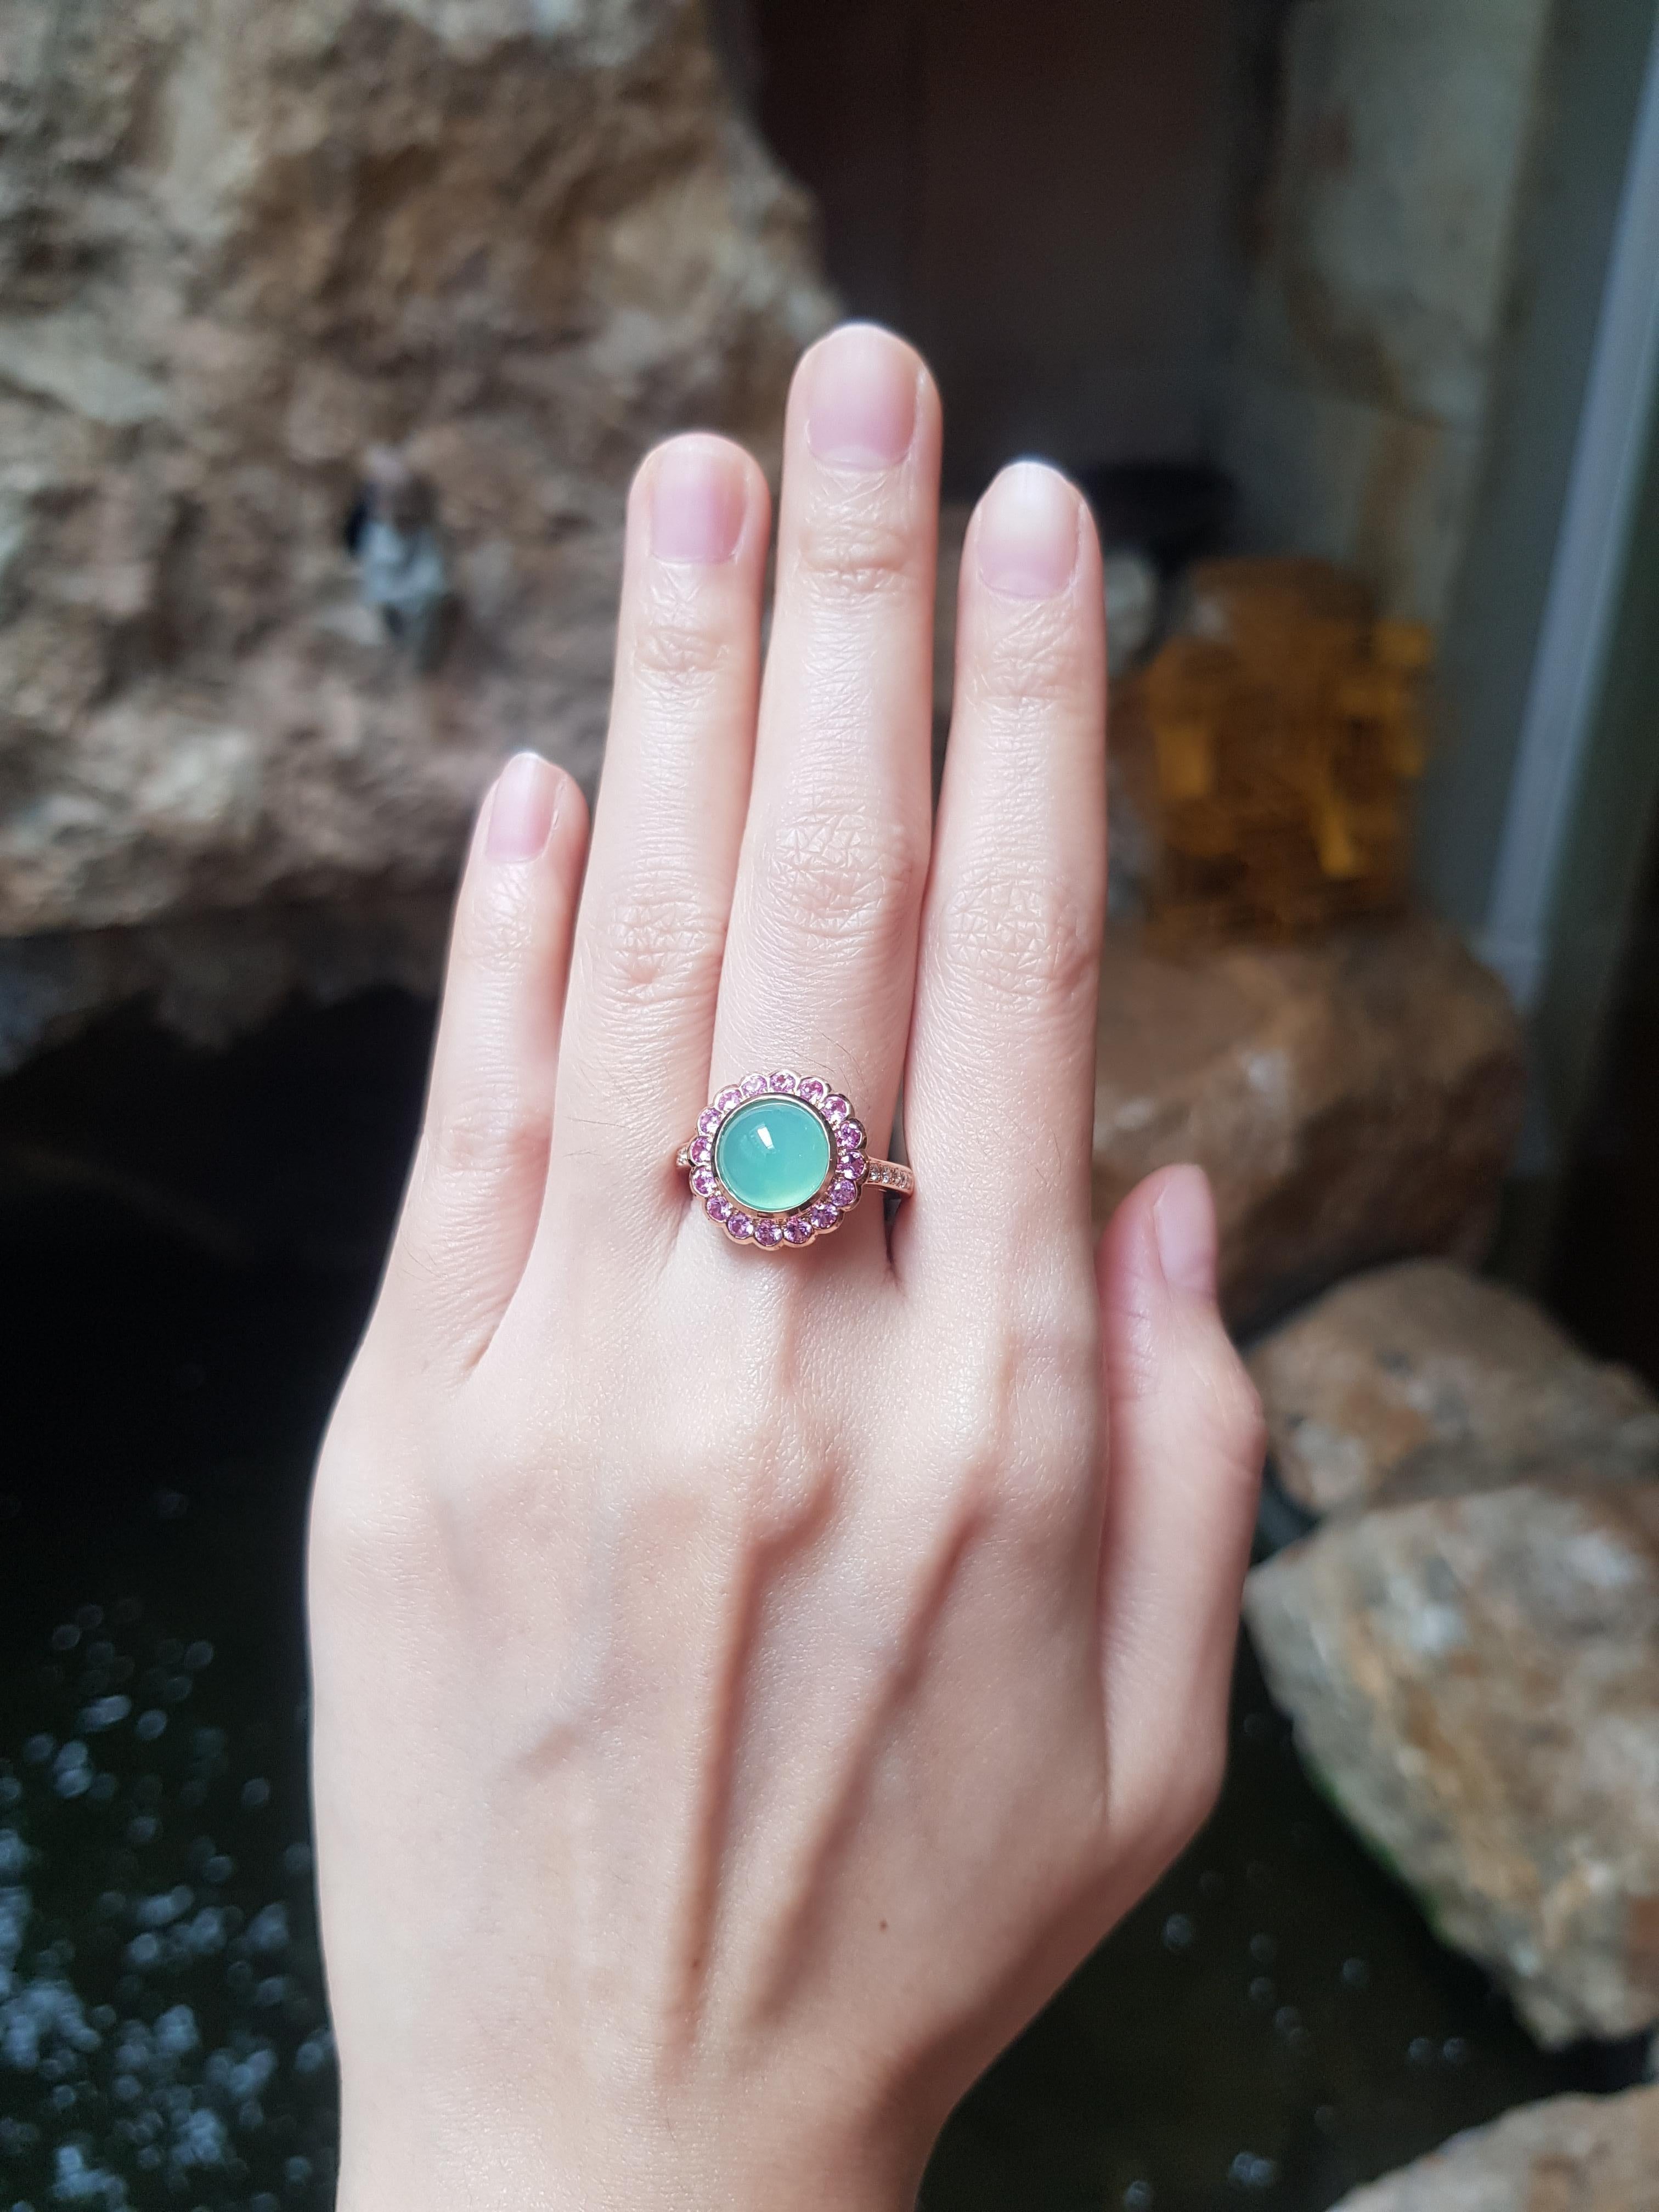 Chrysoprase 3.03 carats, Pink Sapphire 0.79 carats and Diamond 0.10 carat Rings set in 18K Rose Gold Settings

Width:  1.5 cm 
Length: 1.5 cm
Ring Size: 53
Total Weight: 7.14 grams

